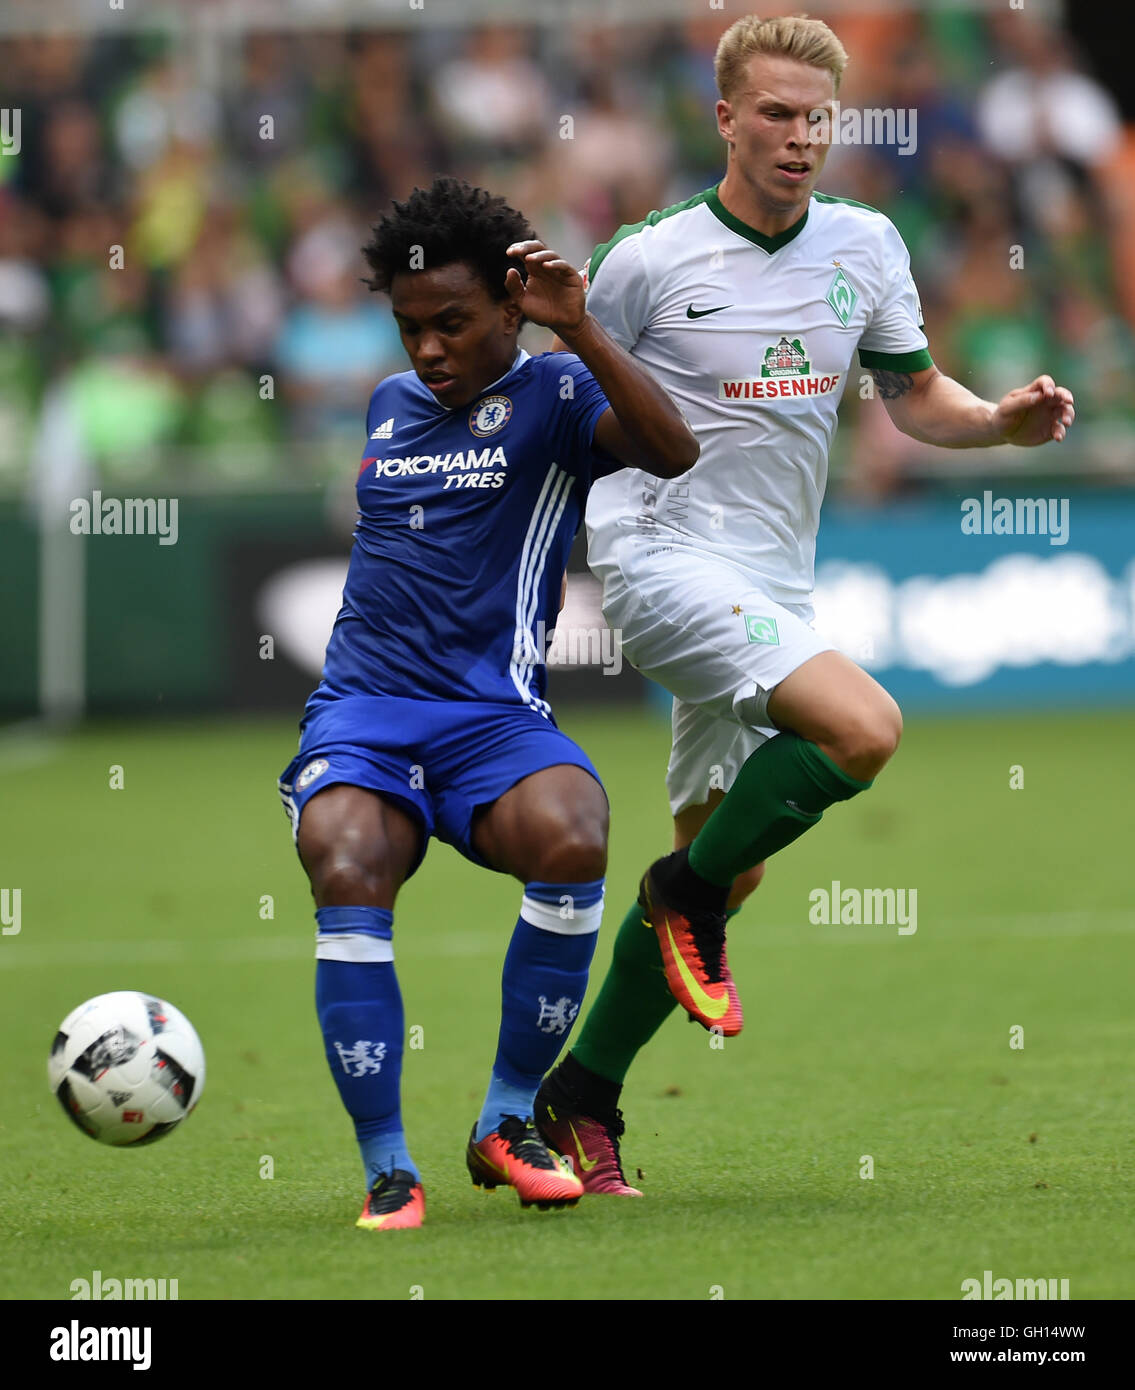 Bremen, Germany. 07th Aug, 2016. Chelsea's Willian Borges da Silva (l) in action against Werders Janek Sternberg during the test match game between Werder Bremen and FC Chelsea in Bremen, Germany, 07 August 2016. Photo: CARMEN JASPERSEN/DPA/Alamy Live News Stock Photo